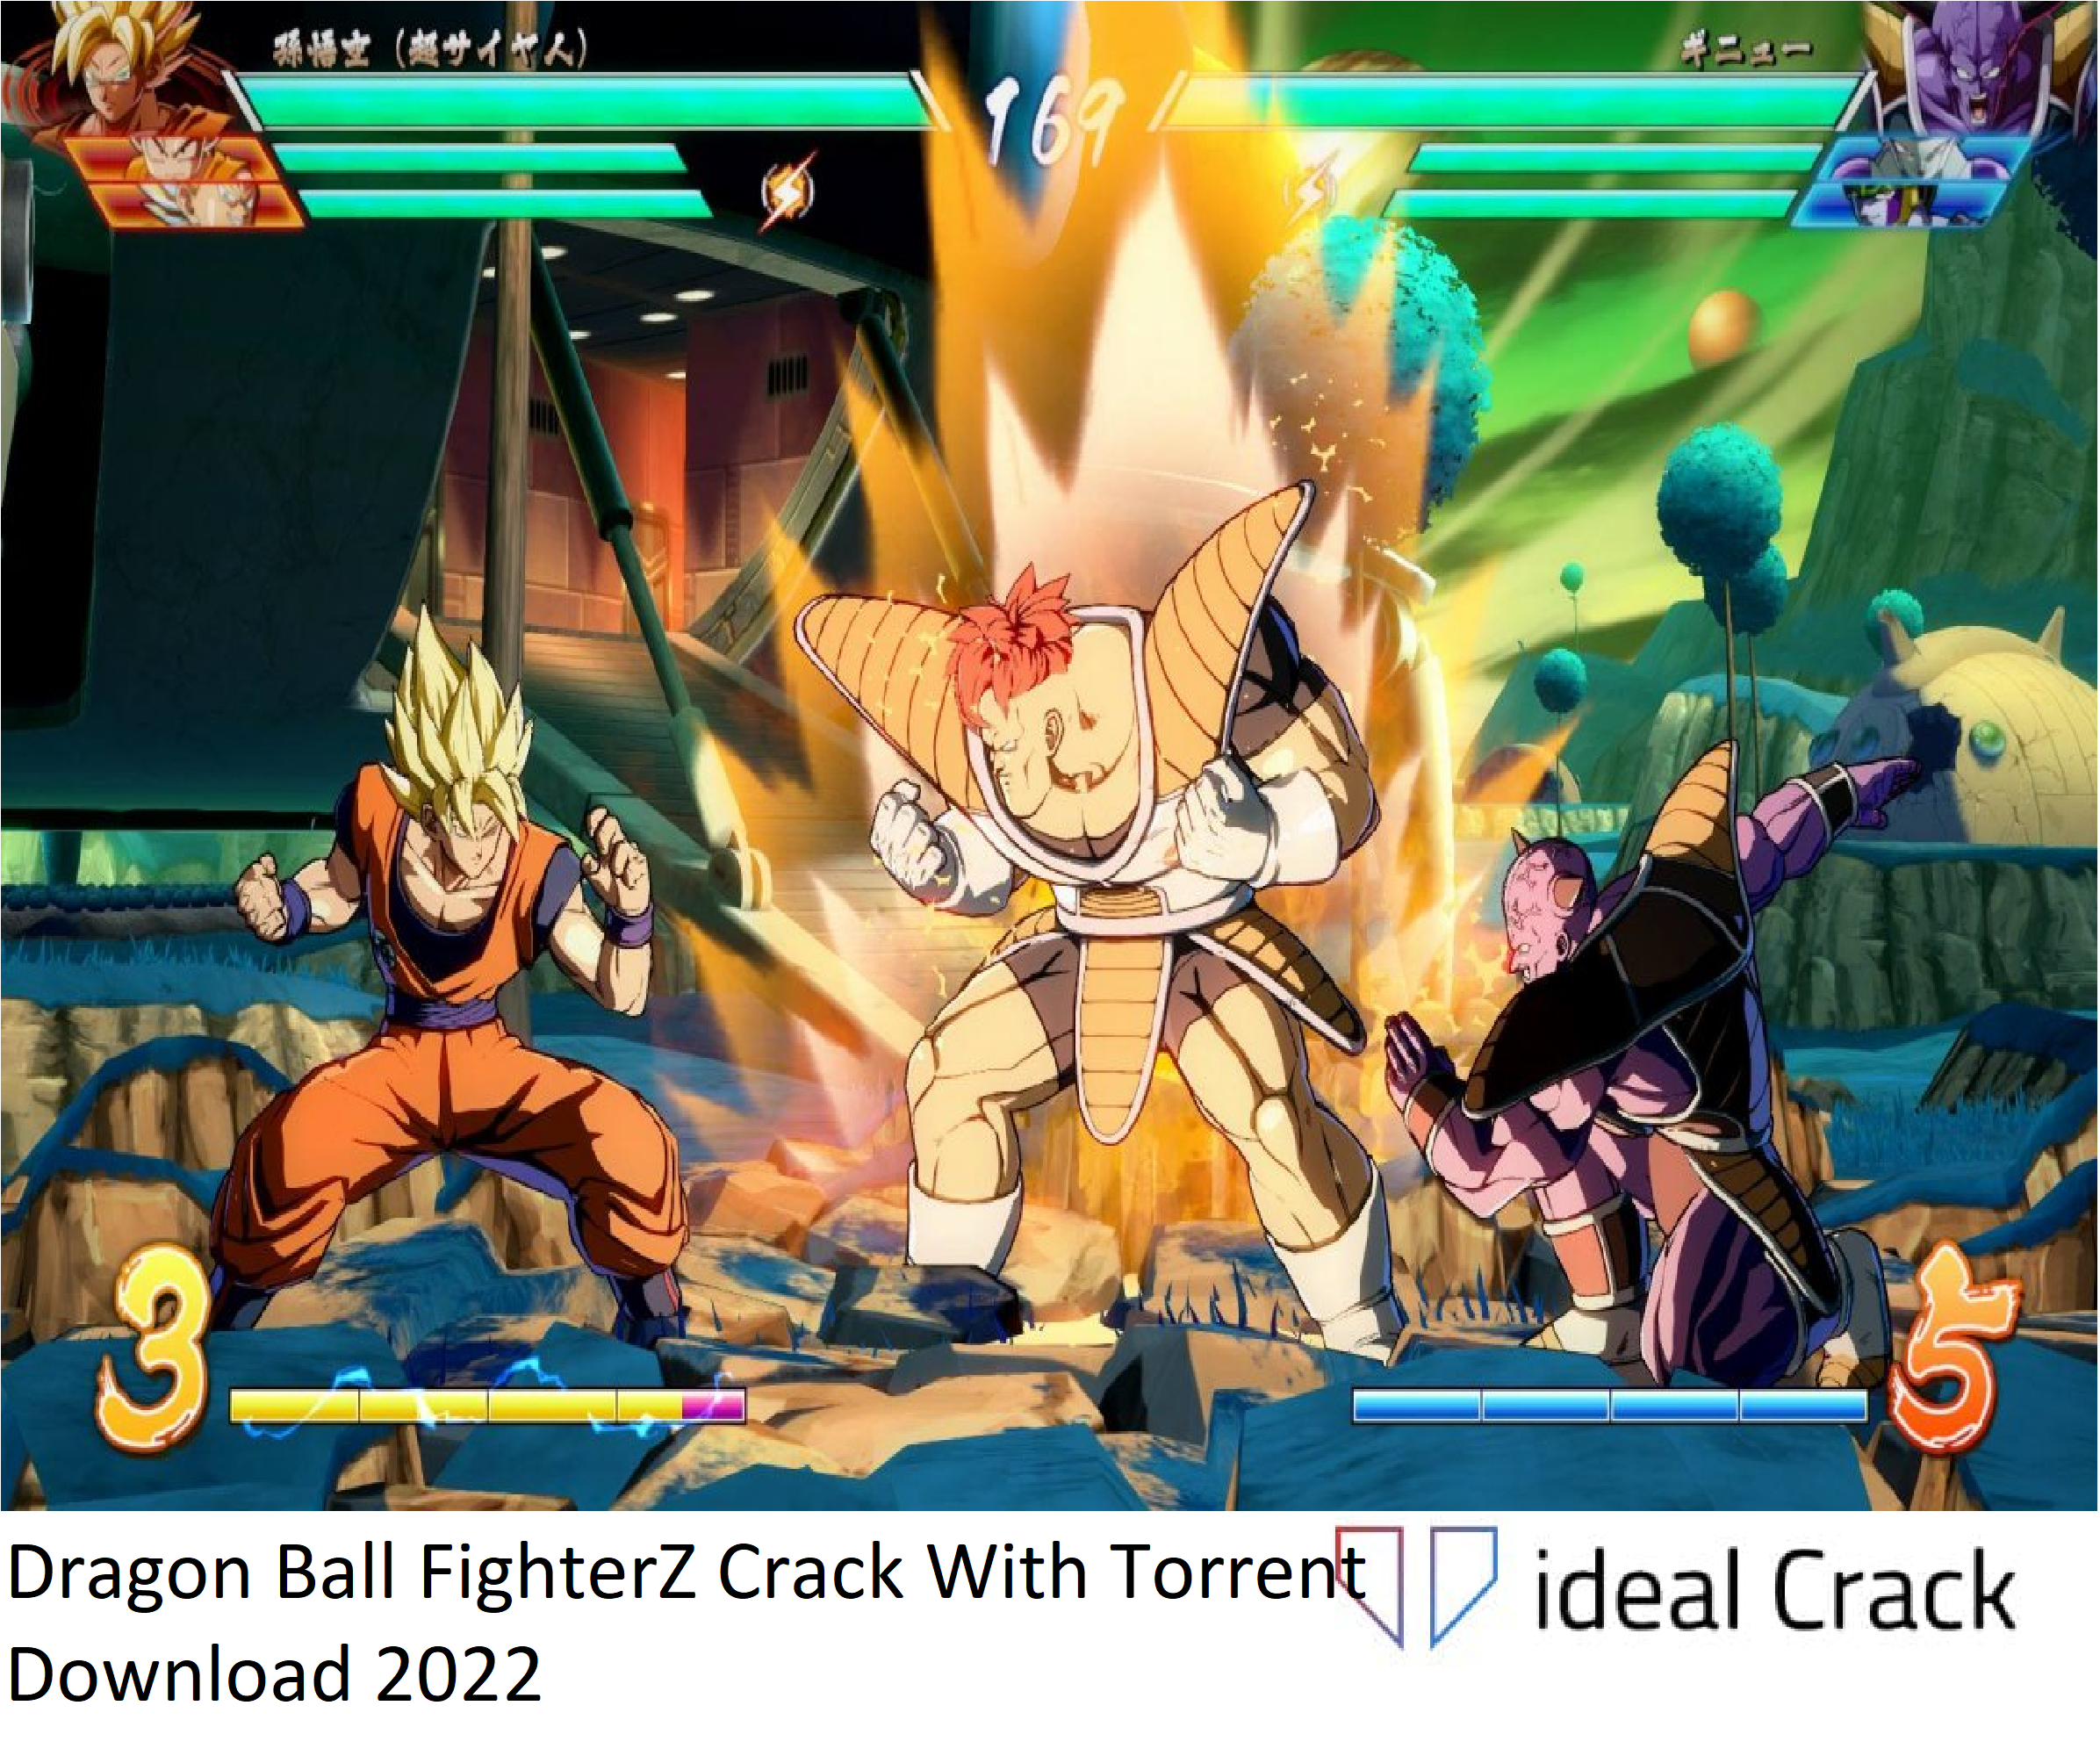 Dragon Ball FighterZ Crack With Torrent Download 2022